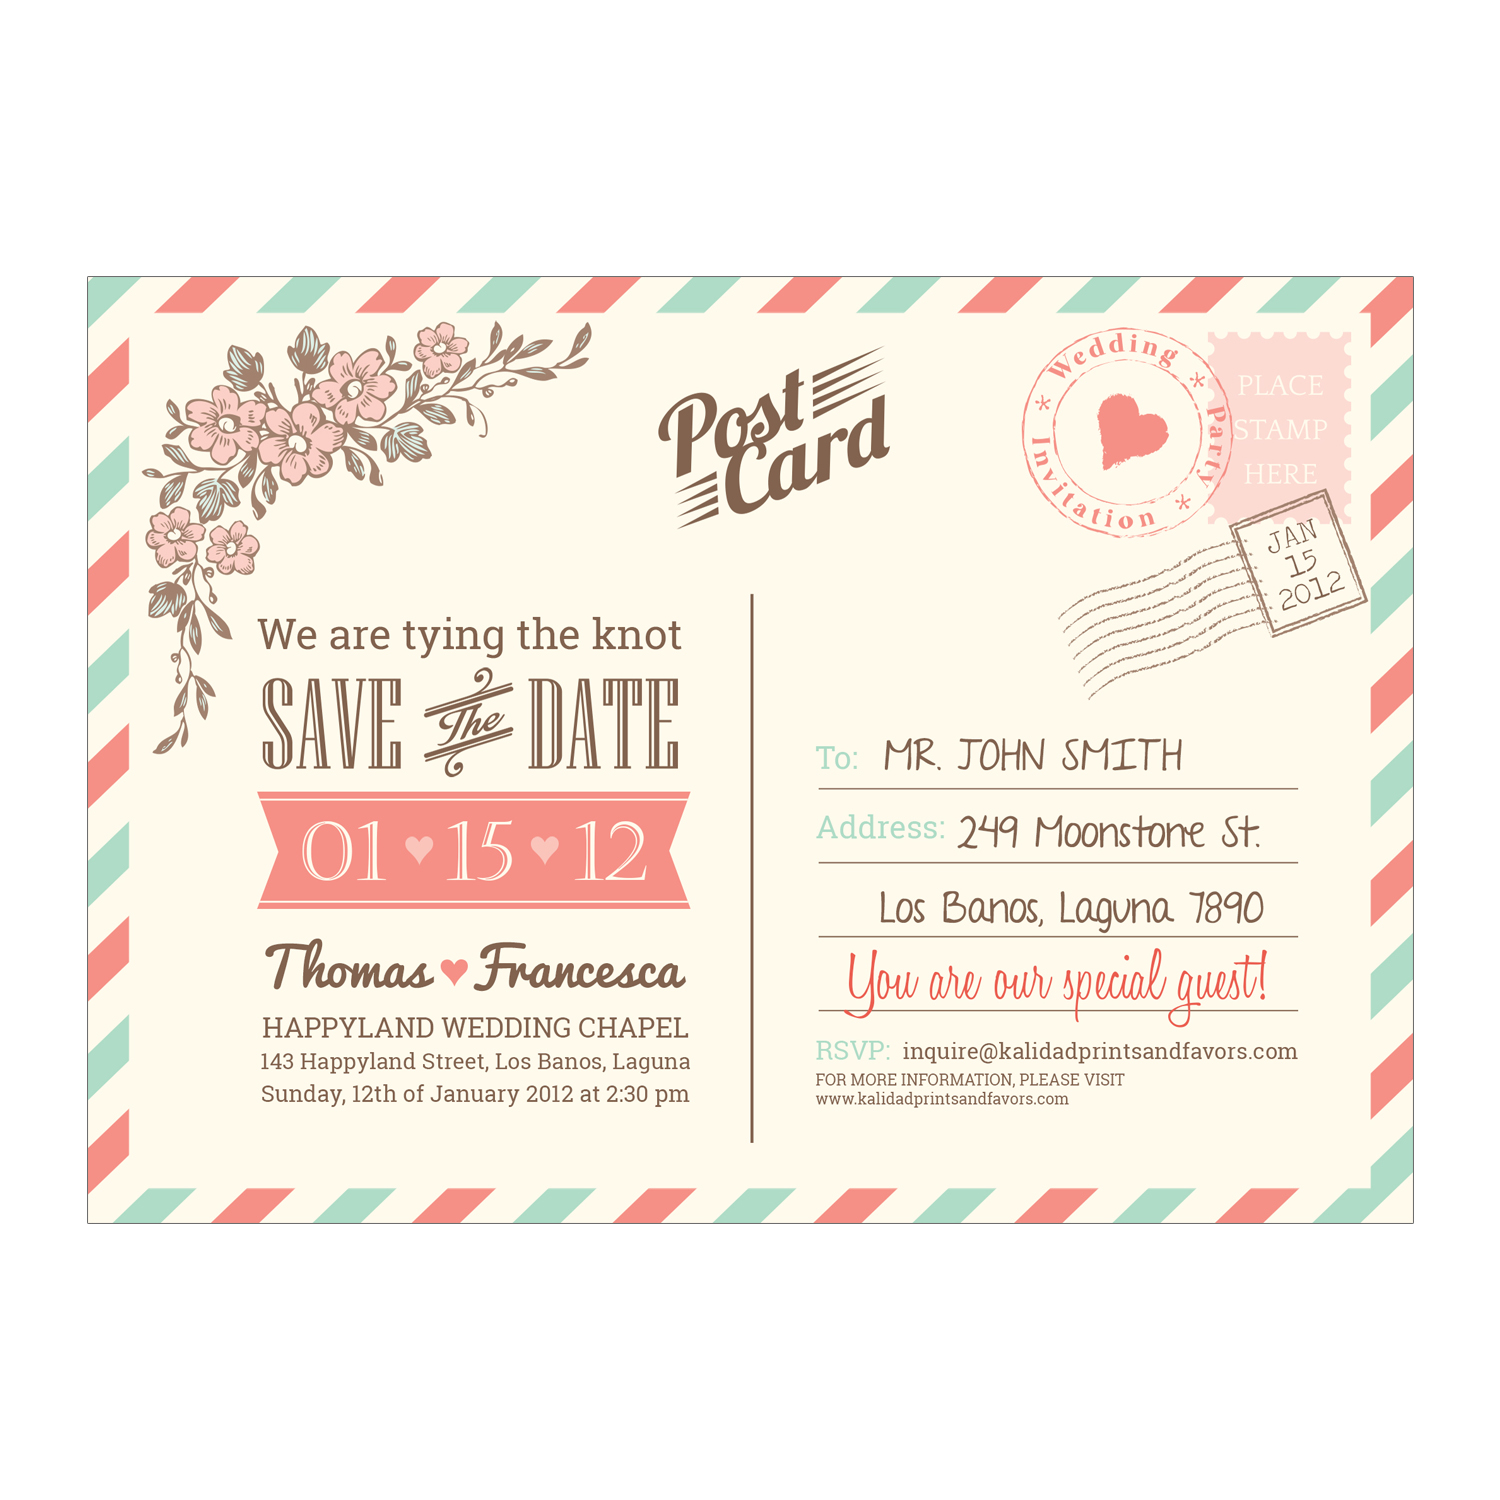 Save the Date Postcard Template with Photo & Chalkboard Type 